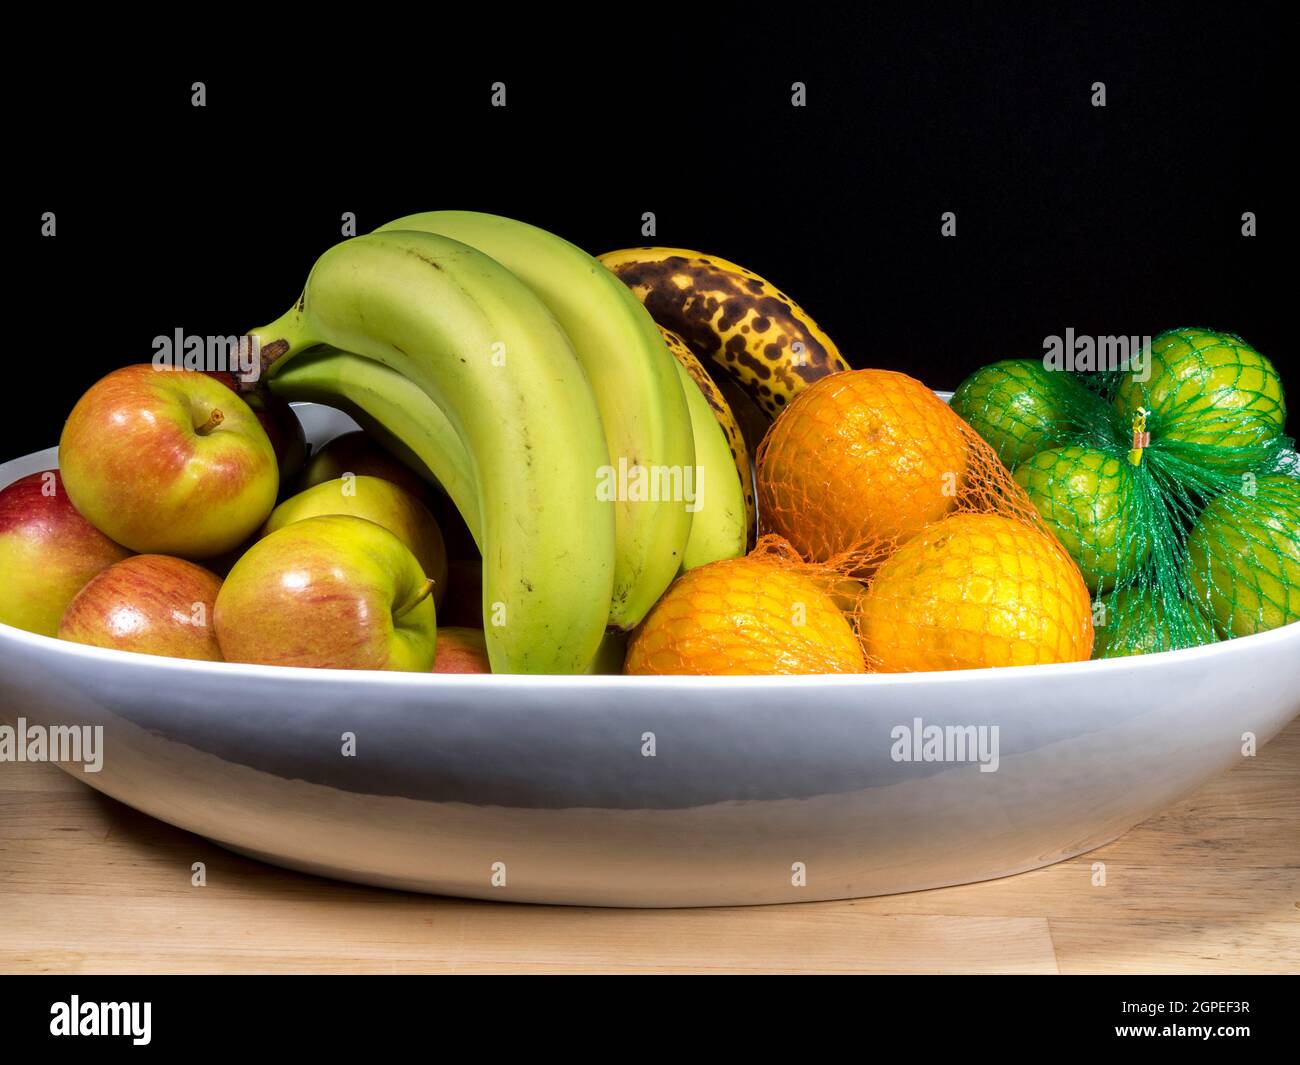 Closeup POV isolated shot of oranges and limes in mesh bags next to apples and bananas in a white display bowl. Stock Photo